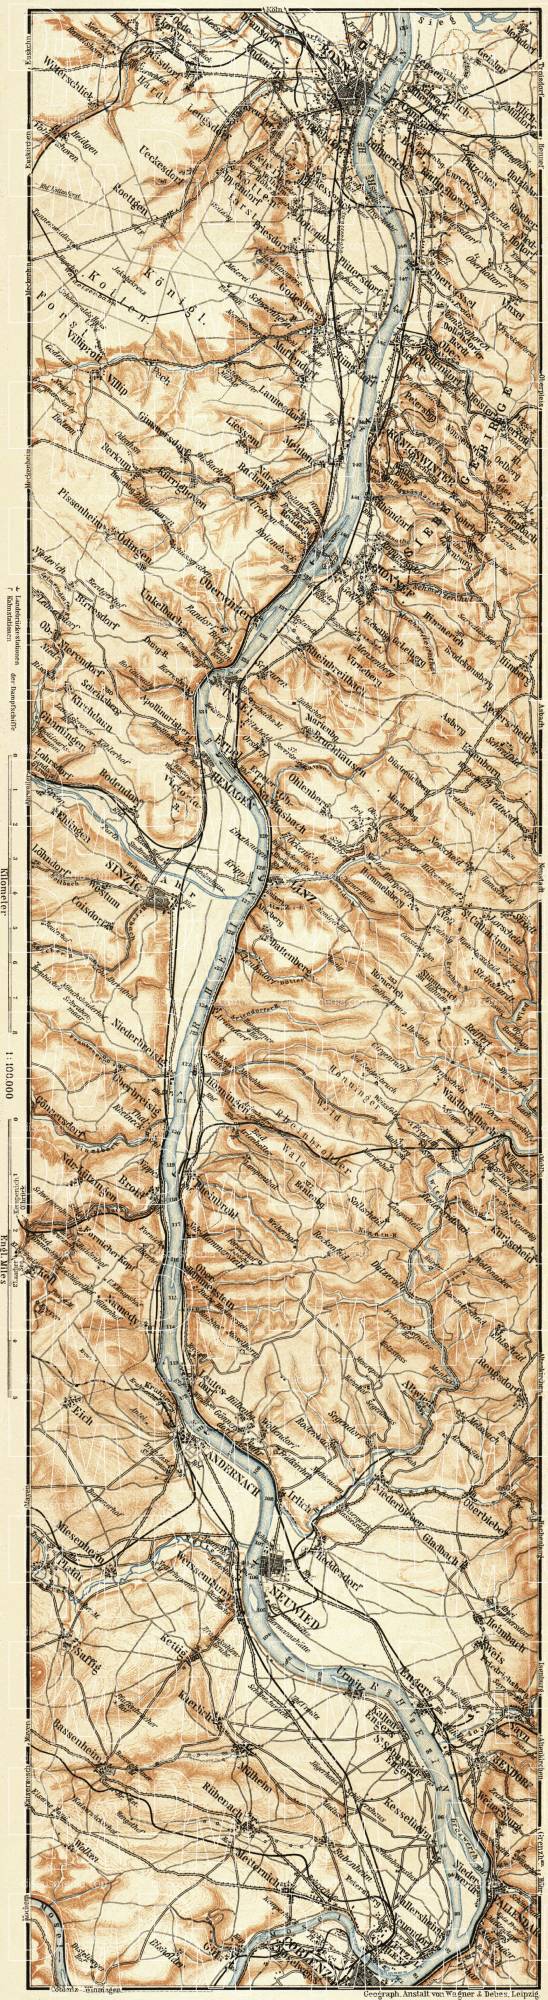 Map of the Course of the Rhine from Bonn to Coblenz, 1905. Use the zooming tool to explore in higher level of detail. Obtain as a quality print or high resolution image